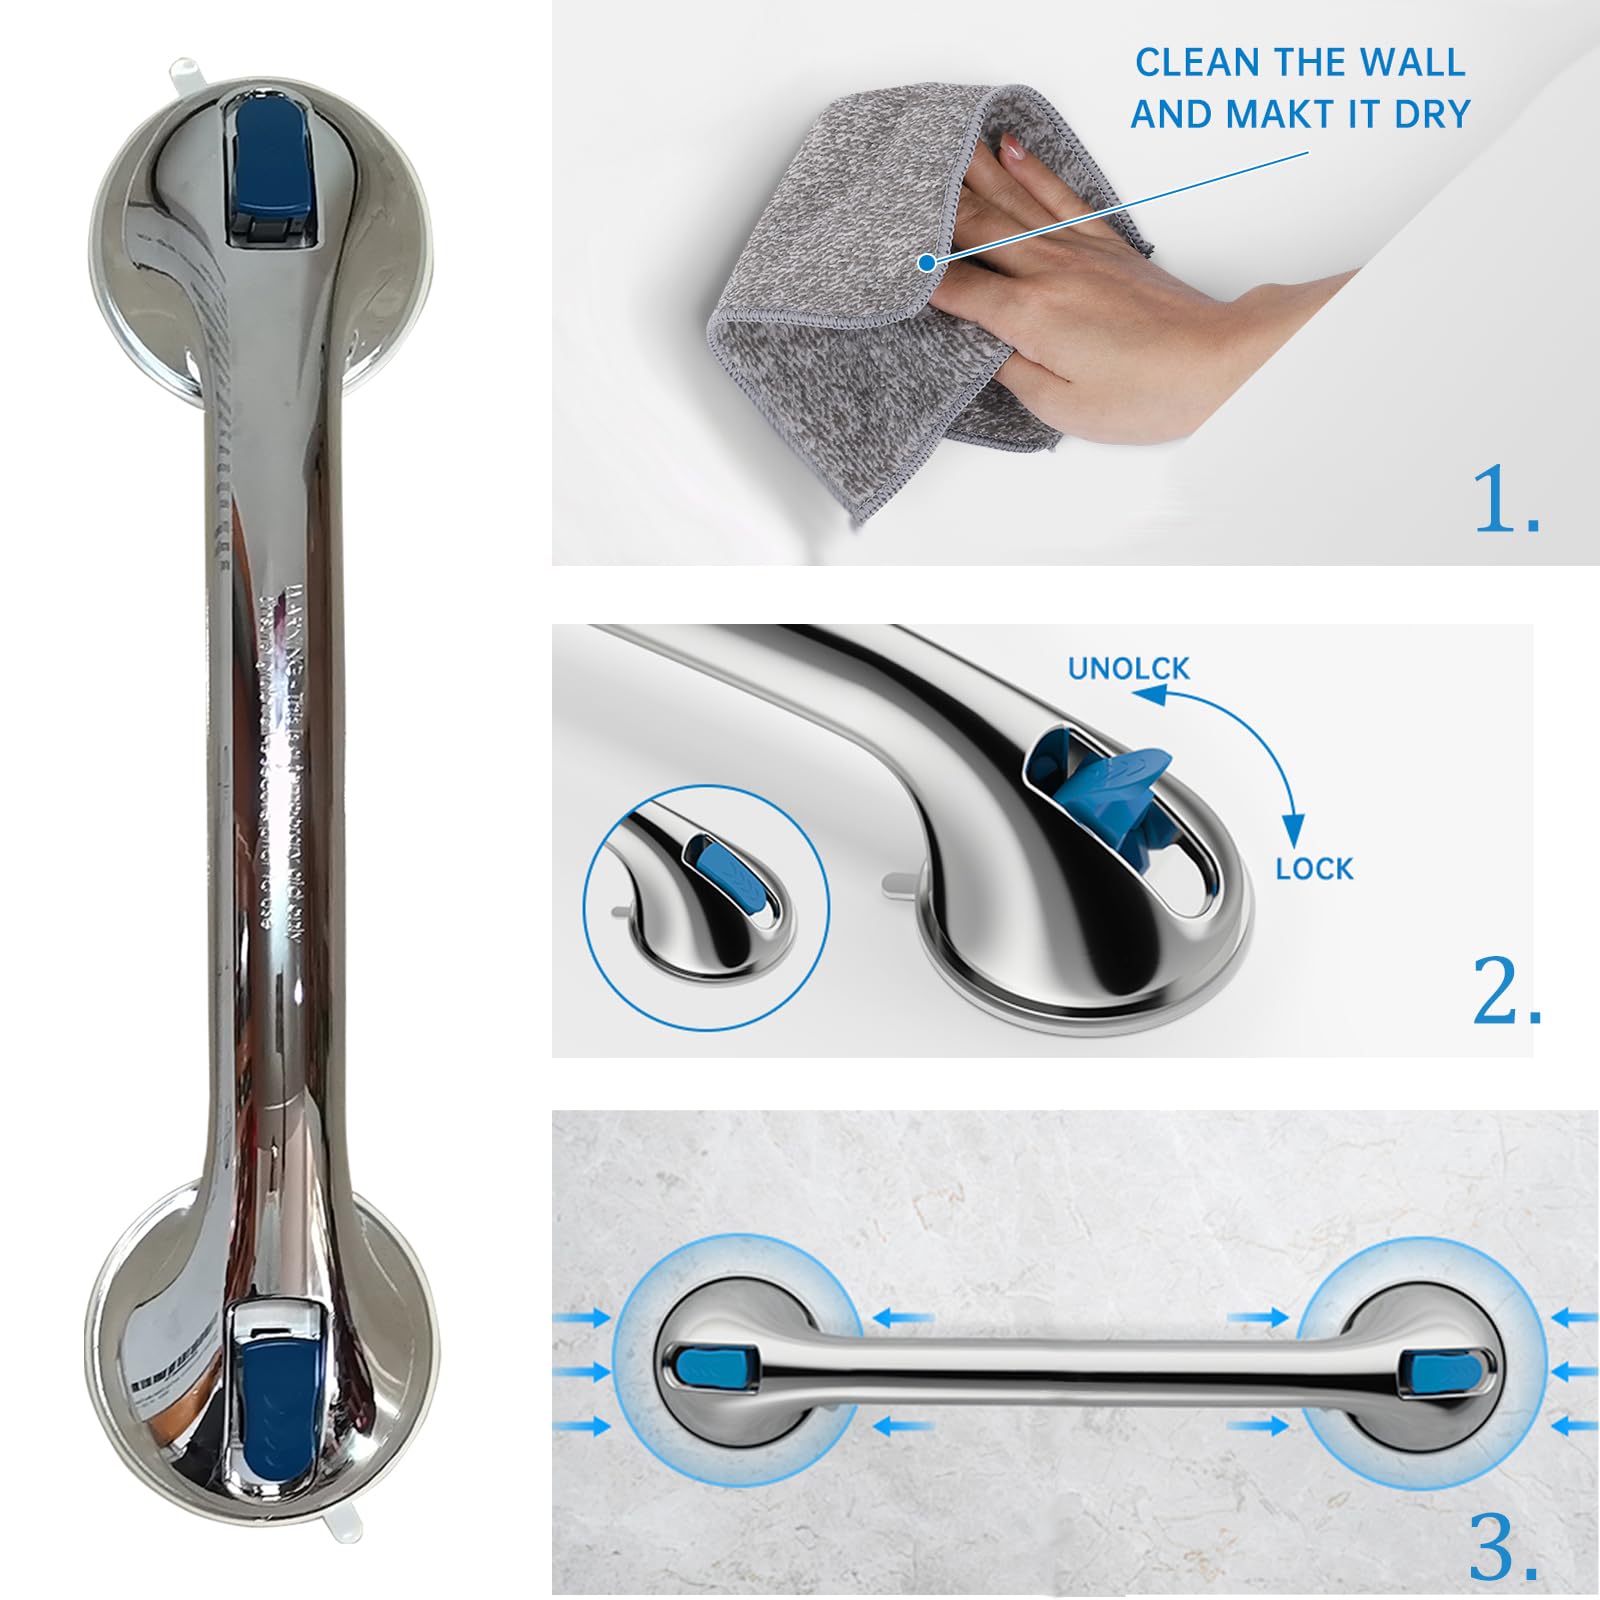 Shower Handle 16 inch Shower Grab Bar for Seniors and Elderly 2 Pack Strong Suction Cup Grab Bars for Bathroom and Showers Bathtub Grab Bar Waterproof, No Drilling Safety Assist Handle